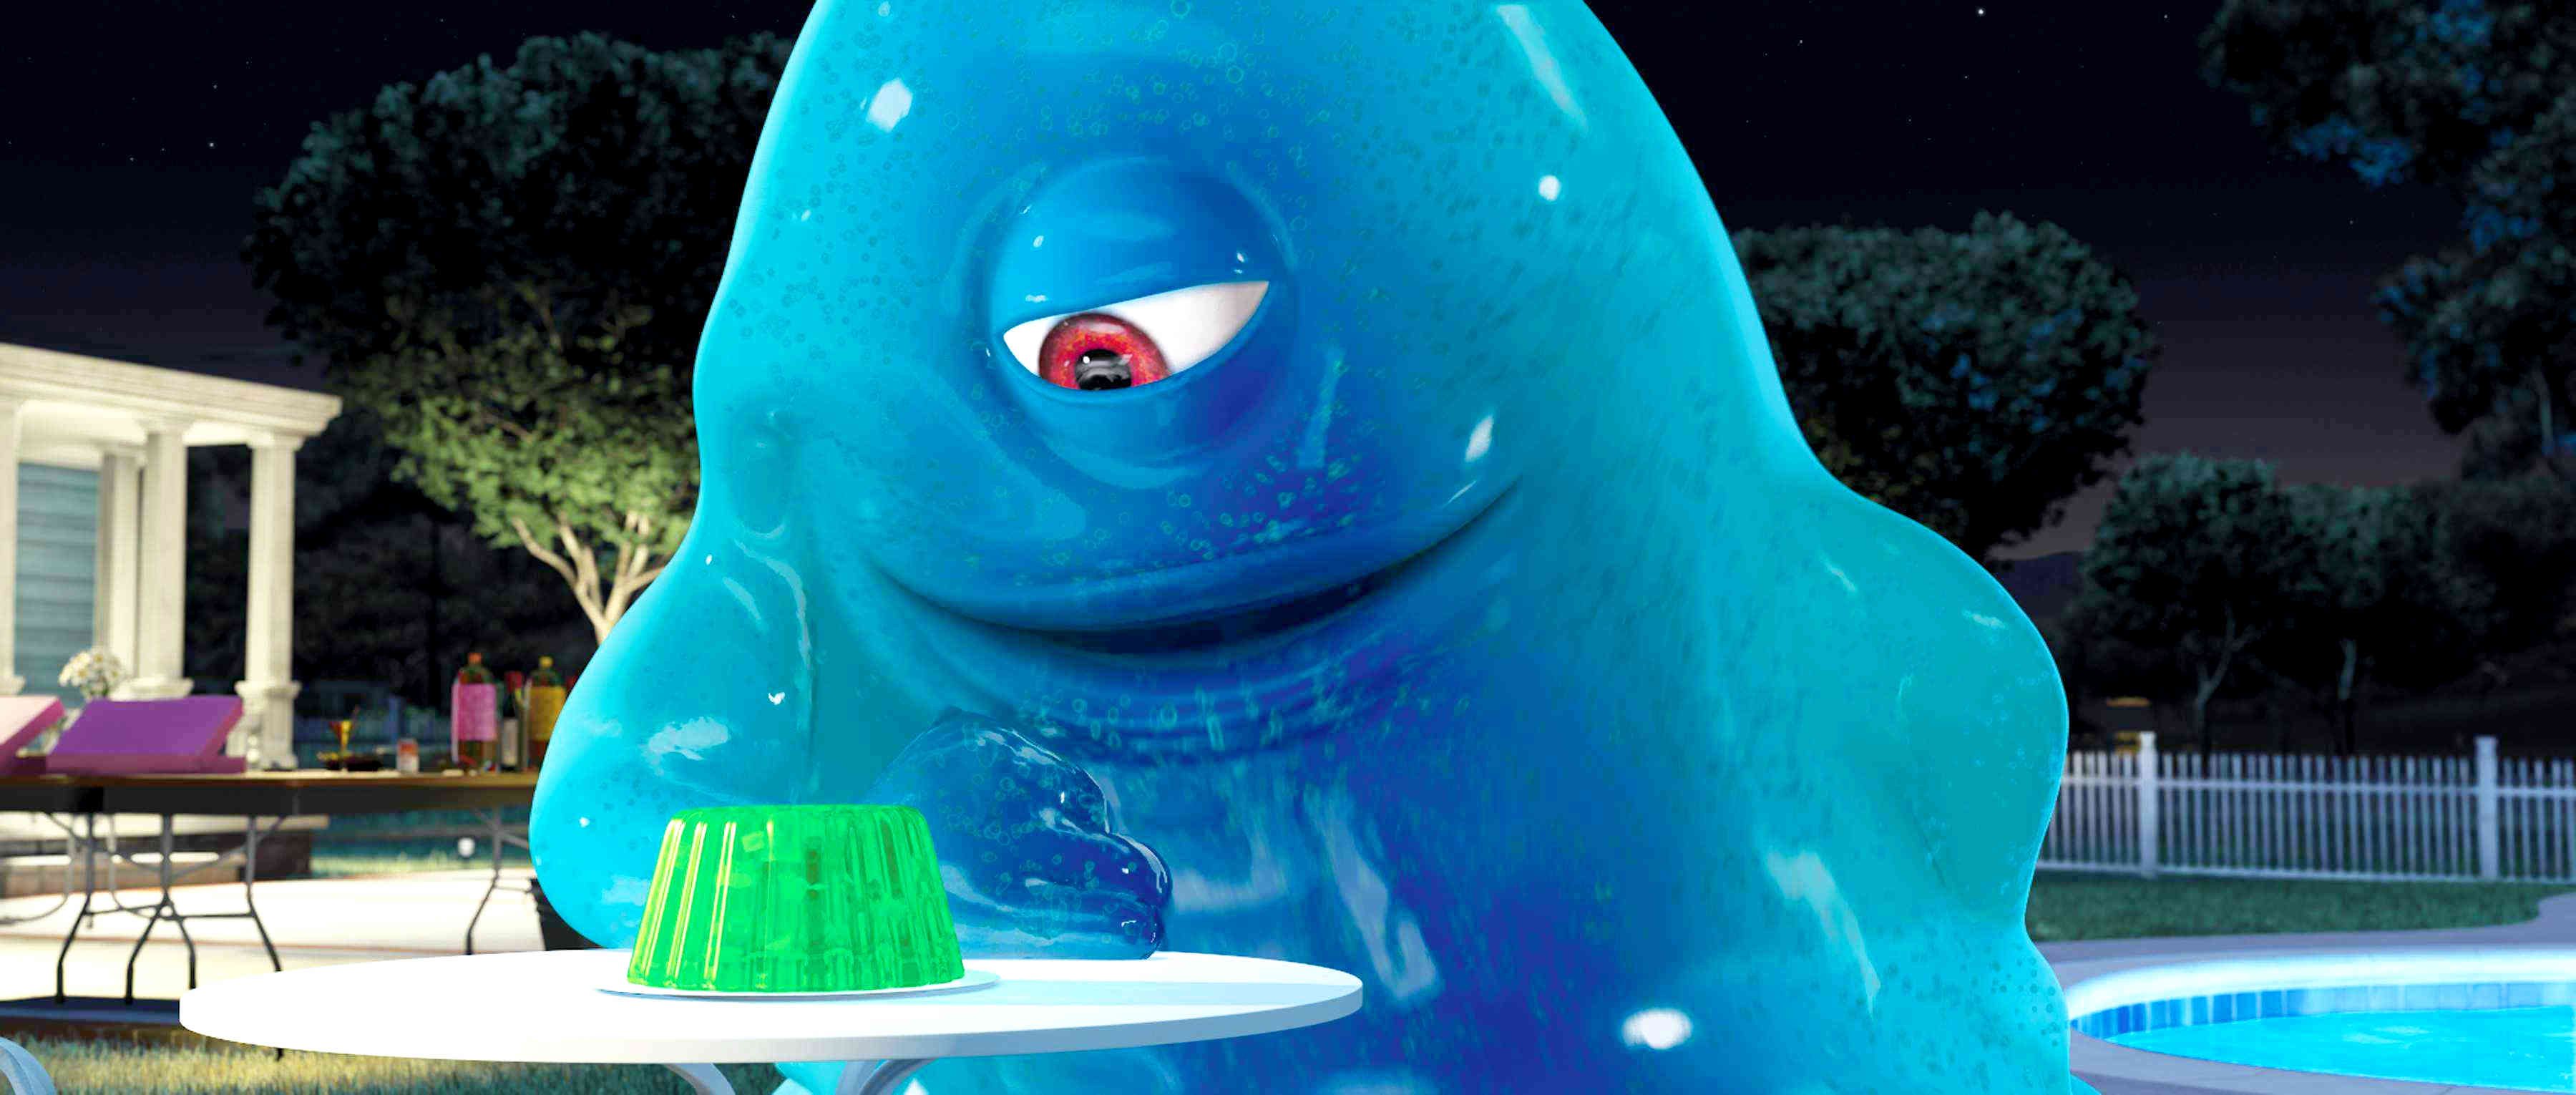 A scene from Paramount Pictures' Monsters vs. Aliens (2009)